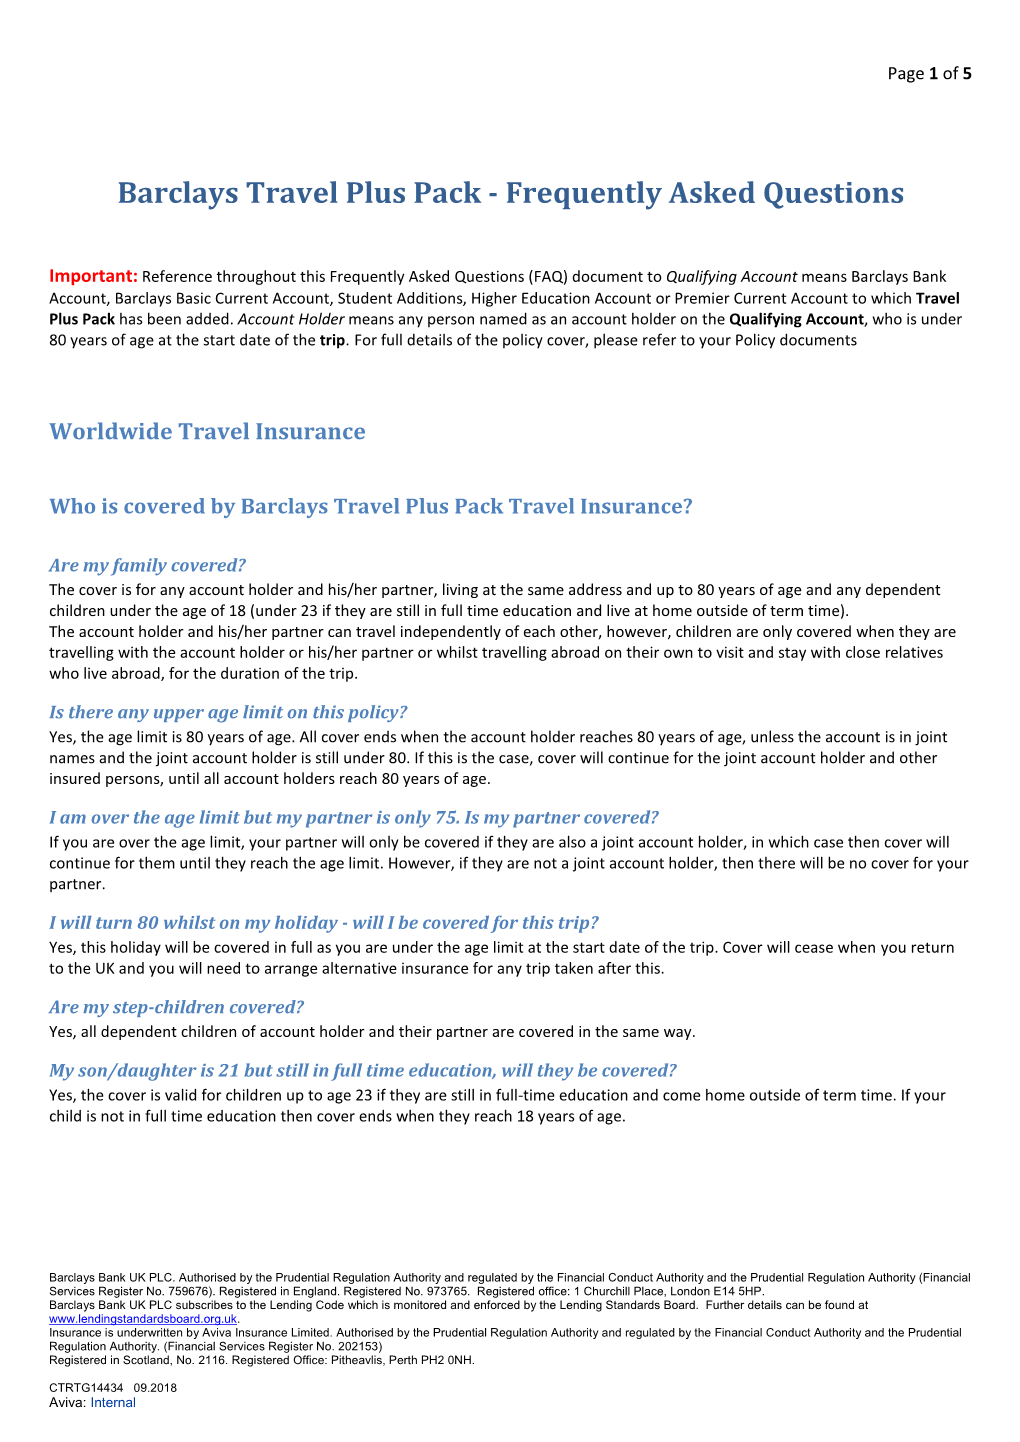 Barclays Travel Plus Pack - Frequently Asked Questions